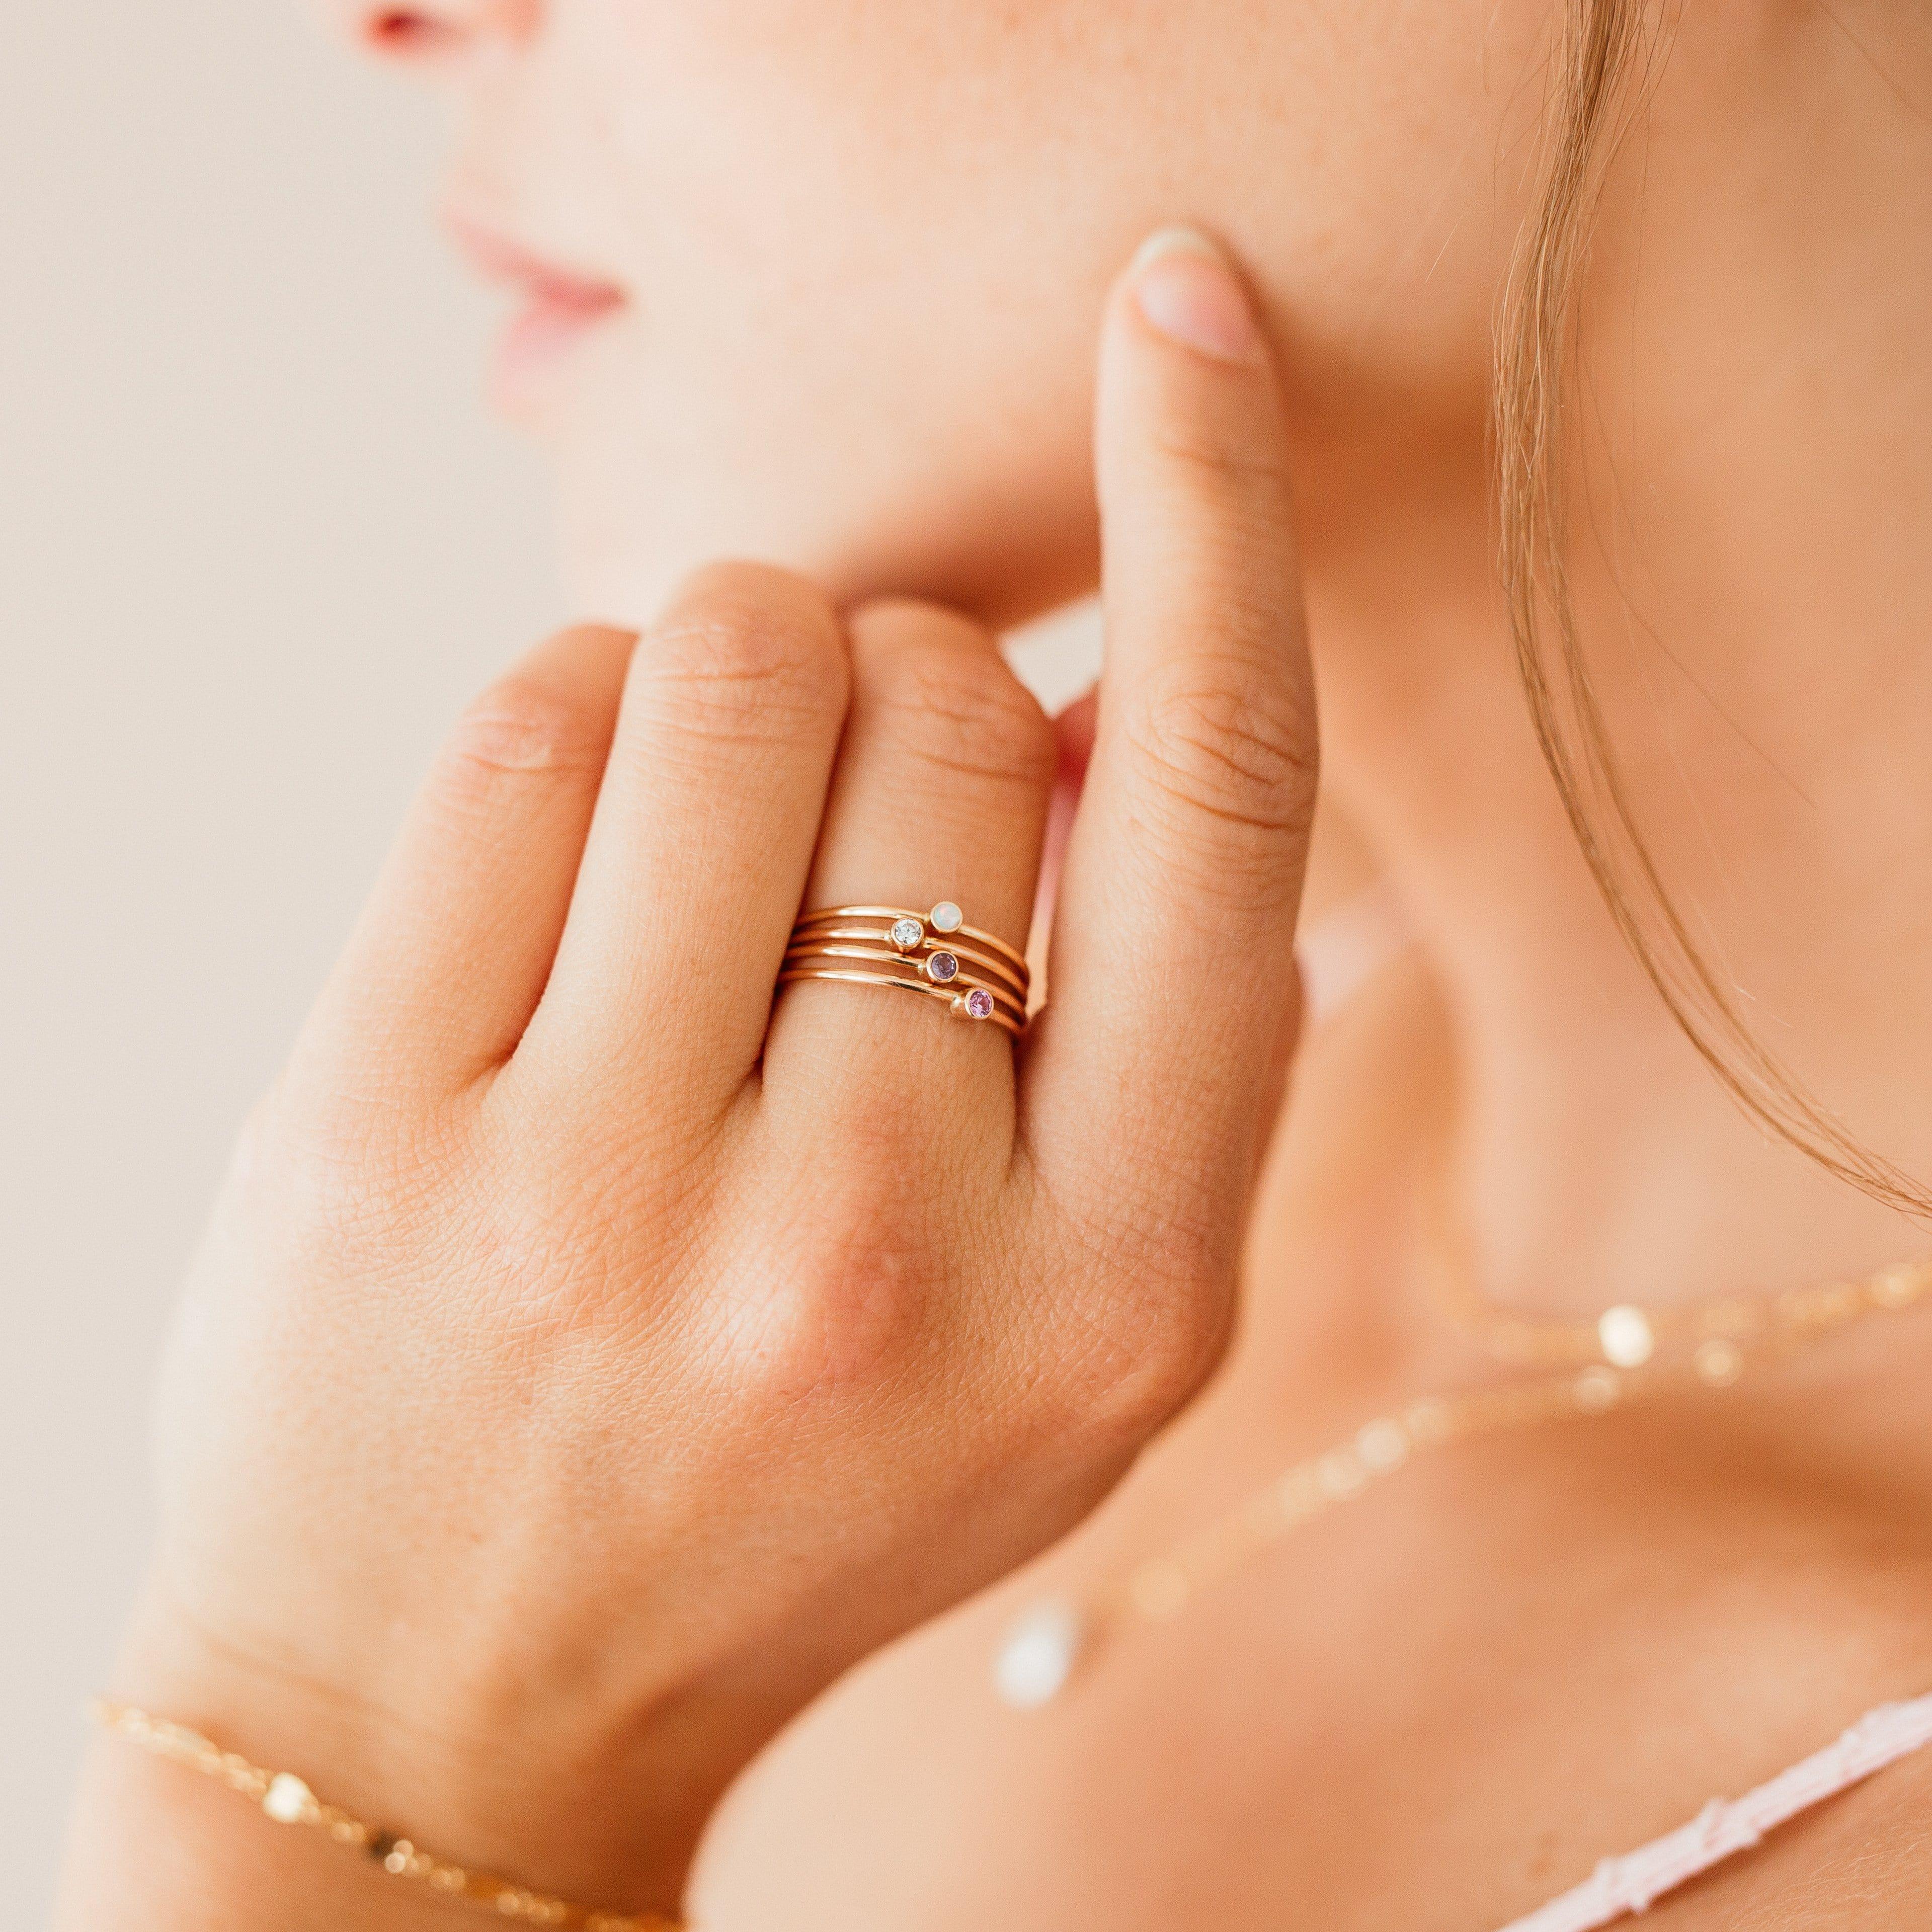 Tiny April Birthstone Ring ∙ Cubic Zirconia - Nolia Jewelry - Meaningful + Sustainably Handcrafted Jewelry